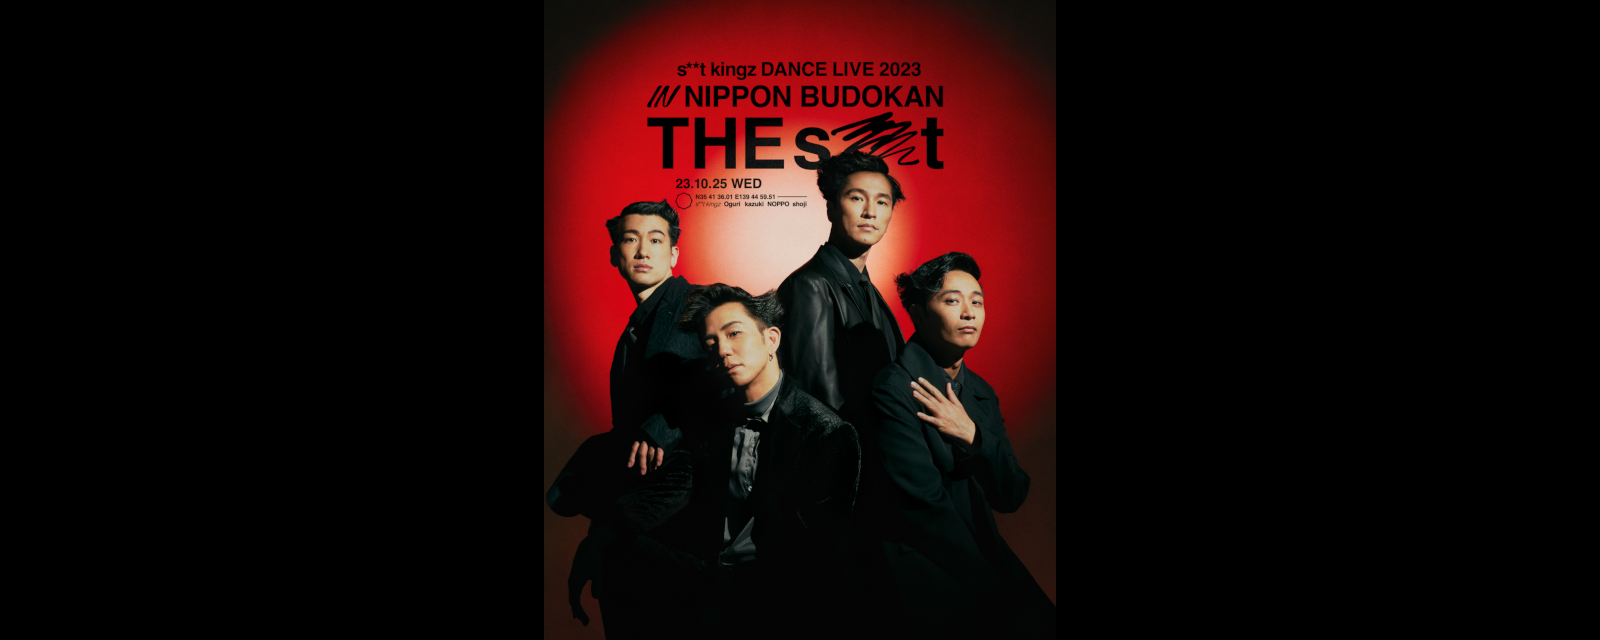 s**t kingz Dance Live 2023 in 日本武道館「THE s**t」 | LIVESHIP